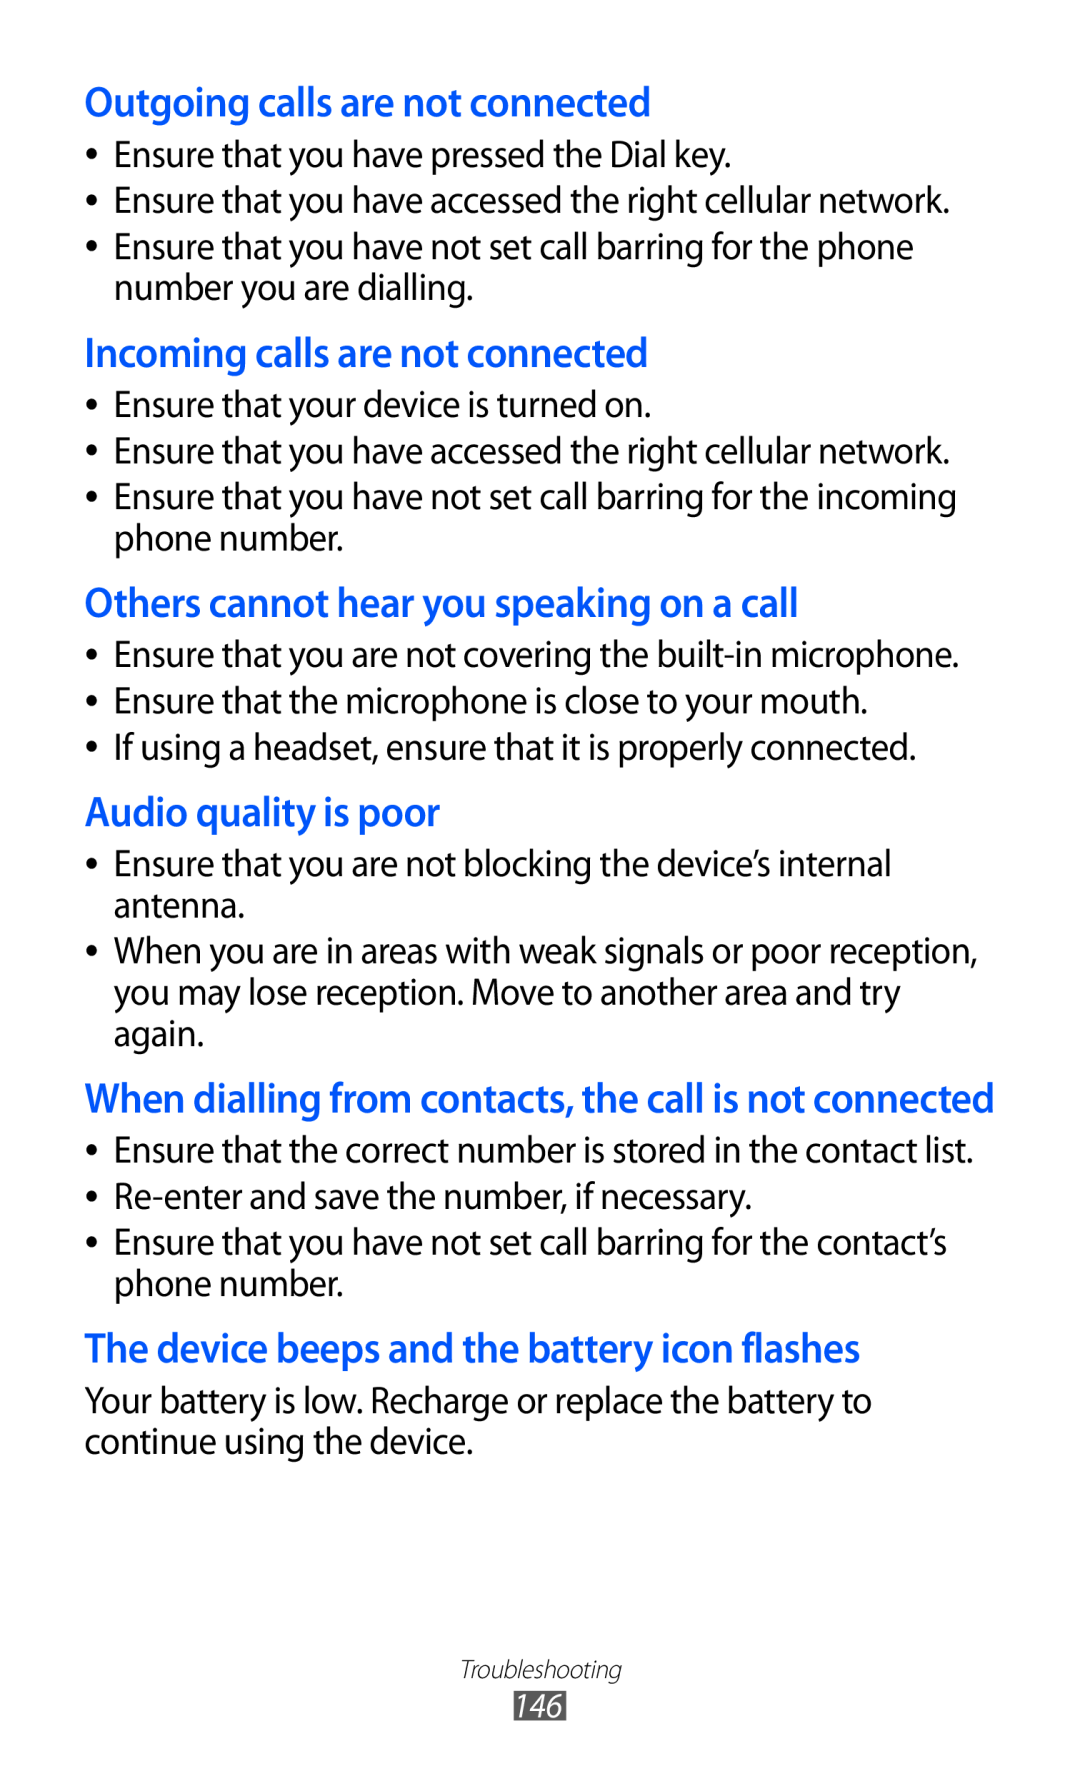 Samsung GT-I9070 user manual Outgoing calls are not connected, Incoming calls are not connected, Audio quality is poor 